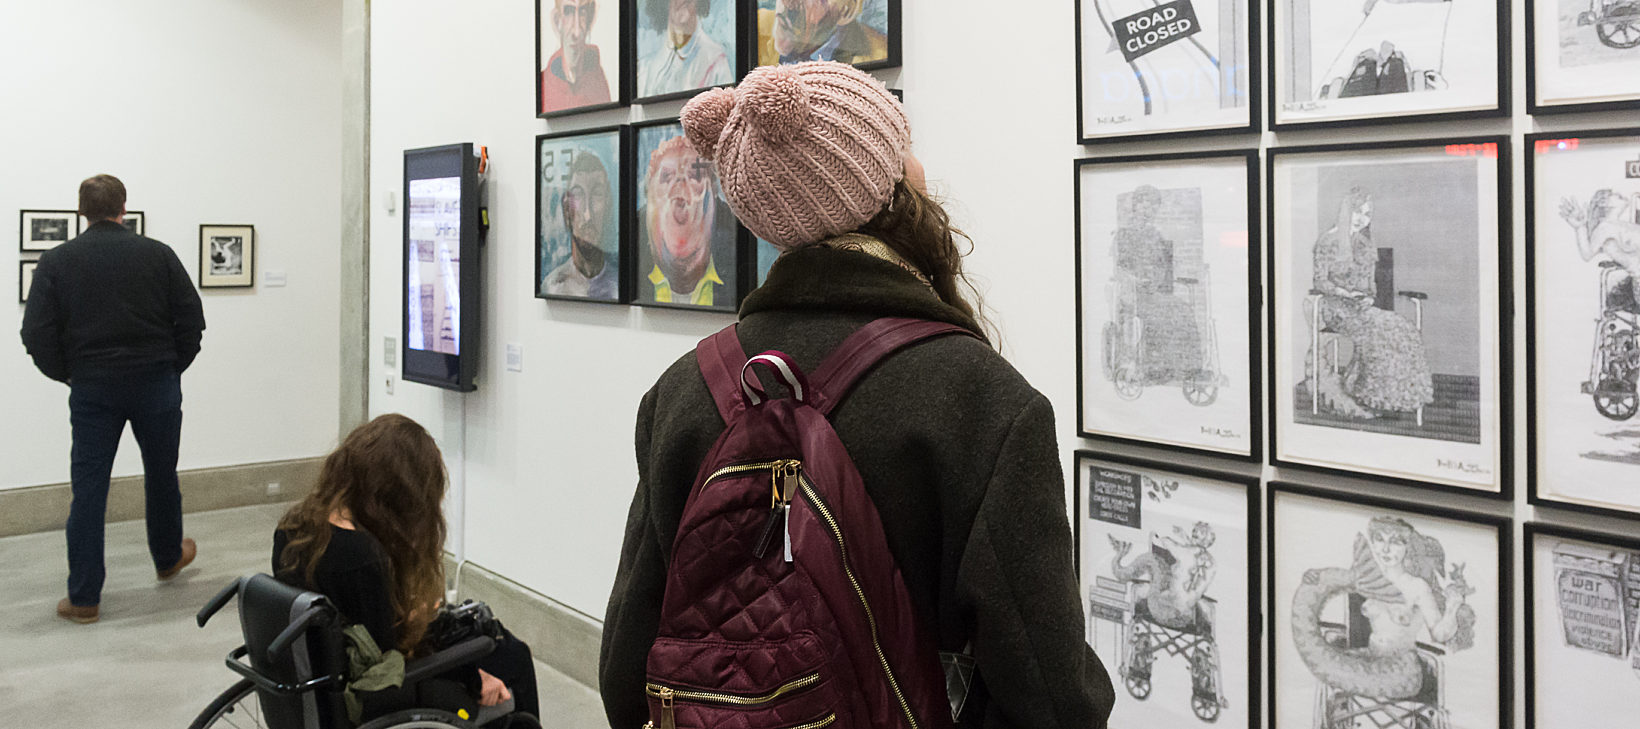 Two people, one in a wheel chair and another in a pink hat and purple, look toward a series of black and white images on the wall.